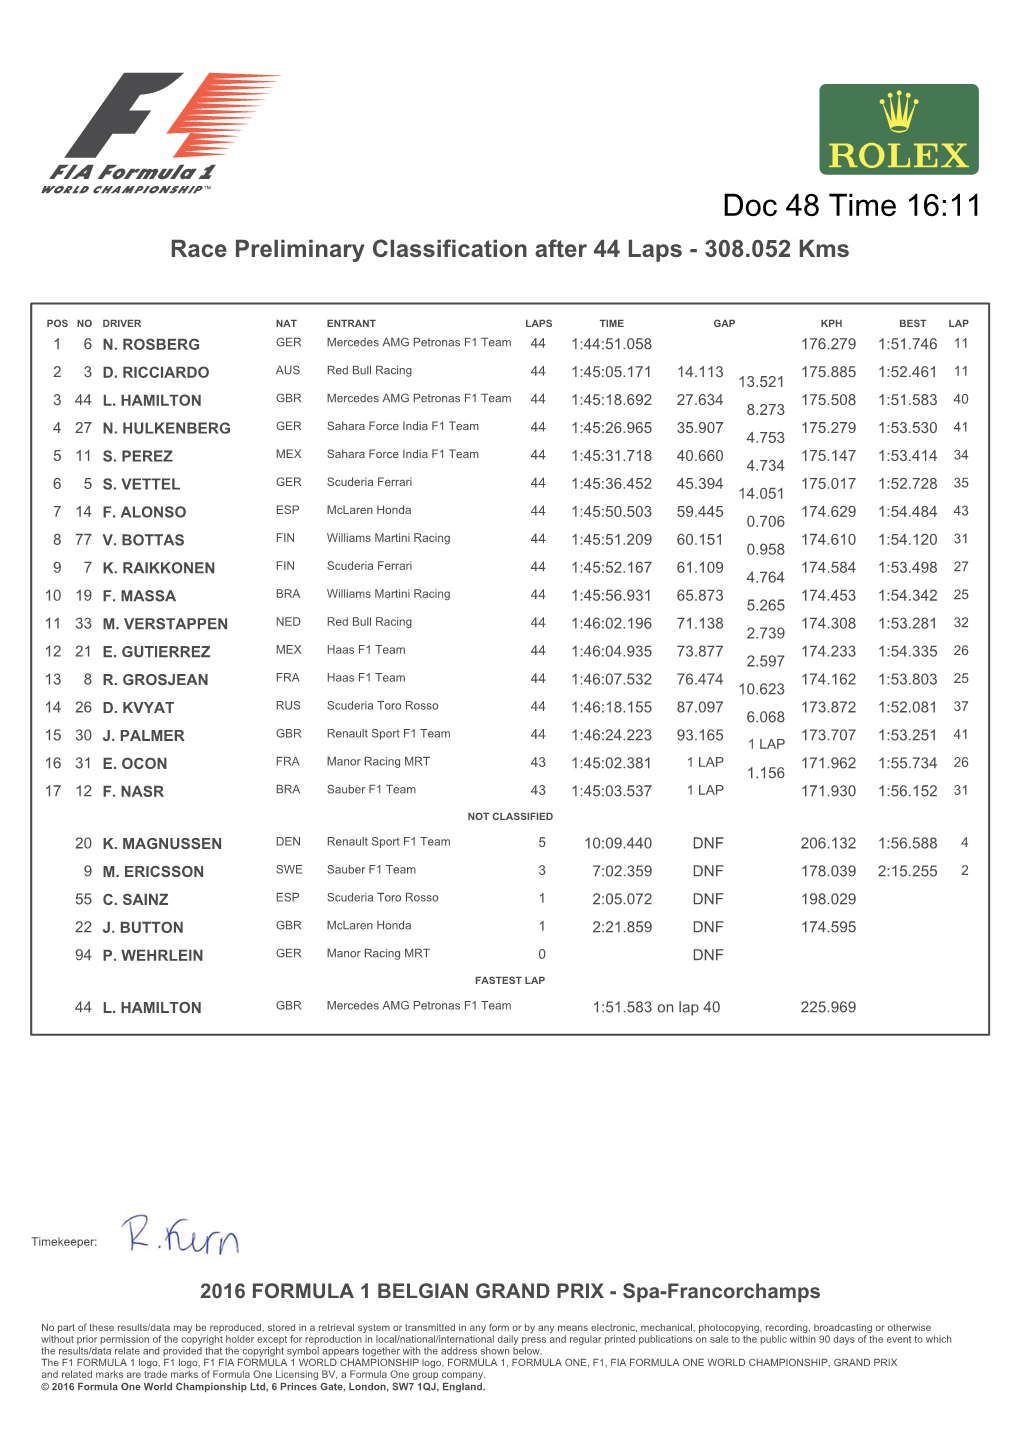 Doc 48 Time 16:11 Race Preliminary Classification After 44 Laps - 308.052 Kms